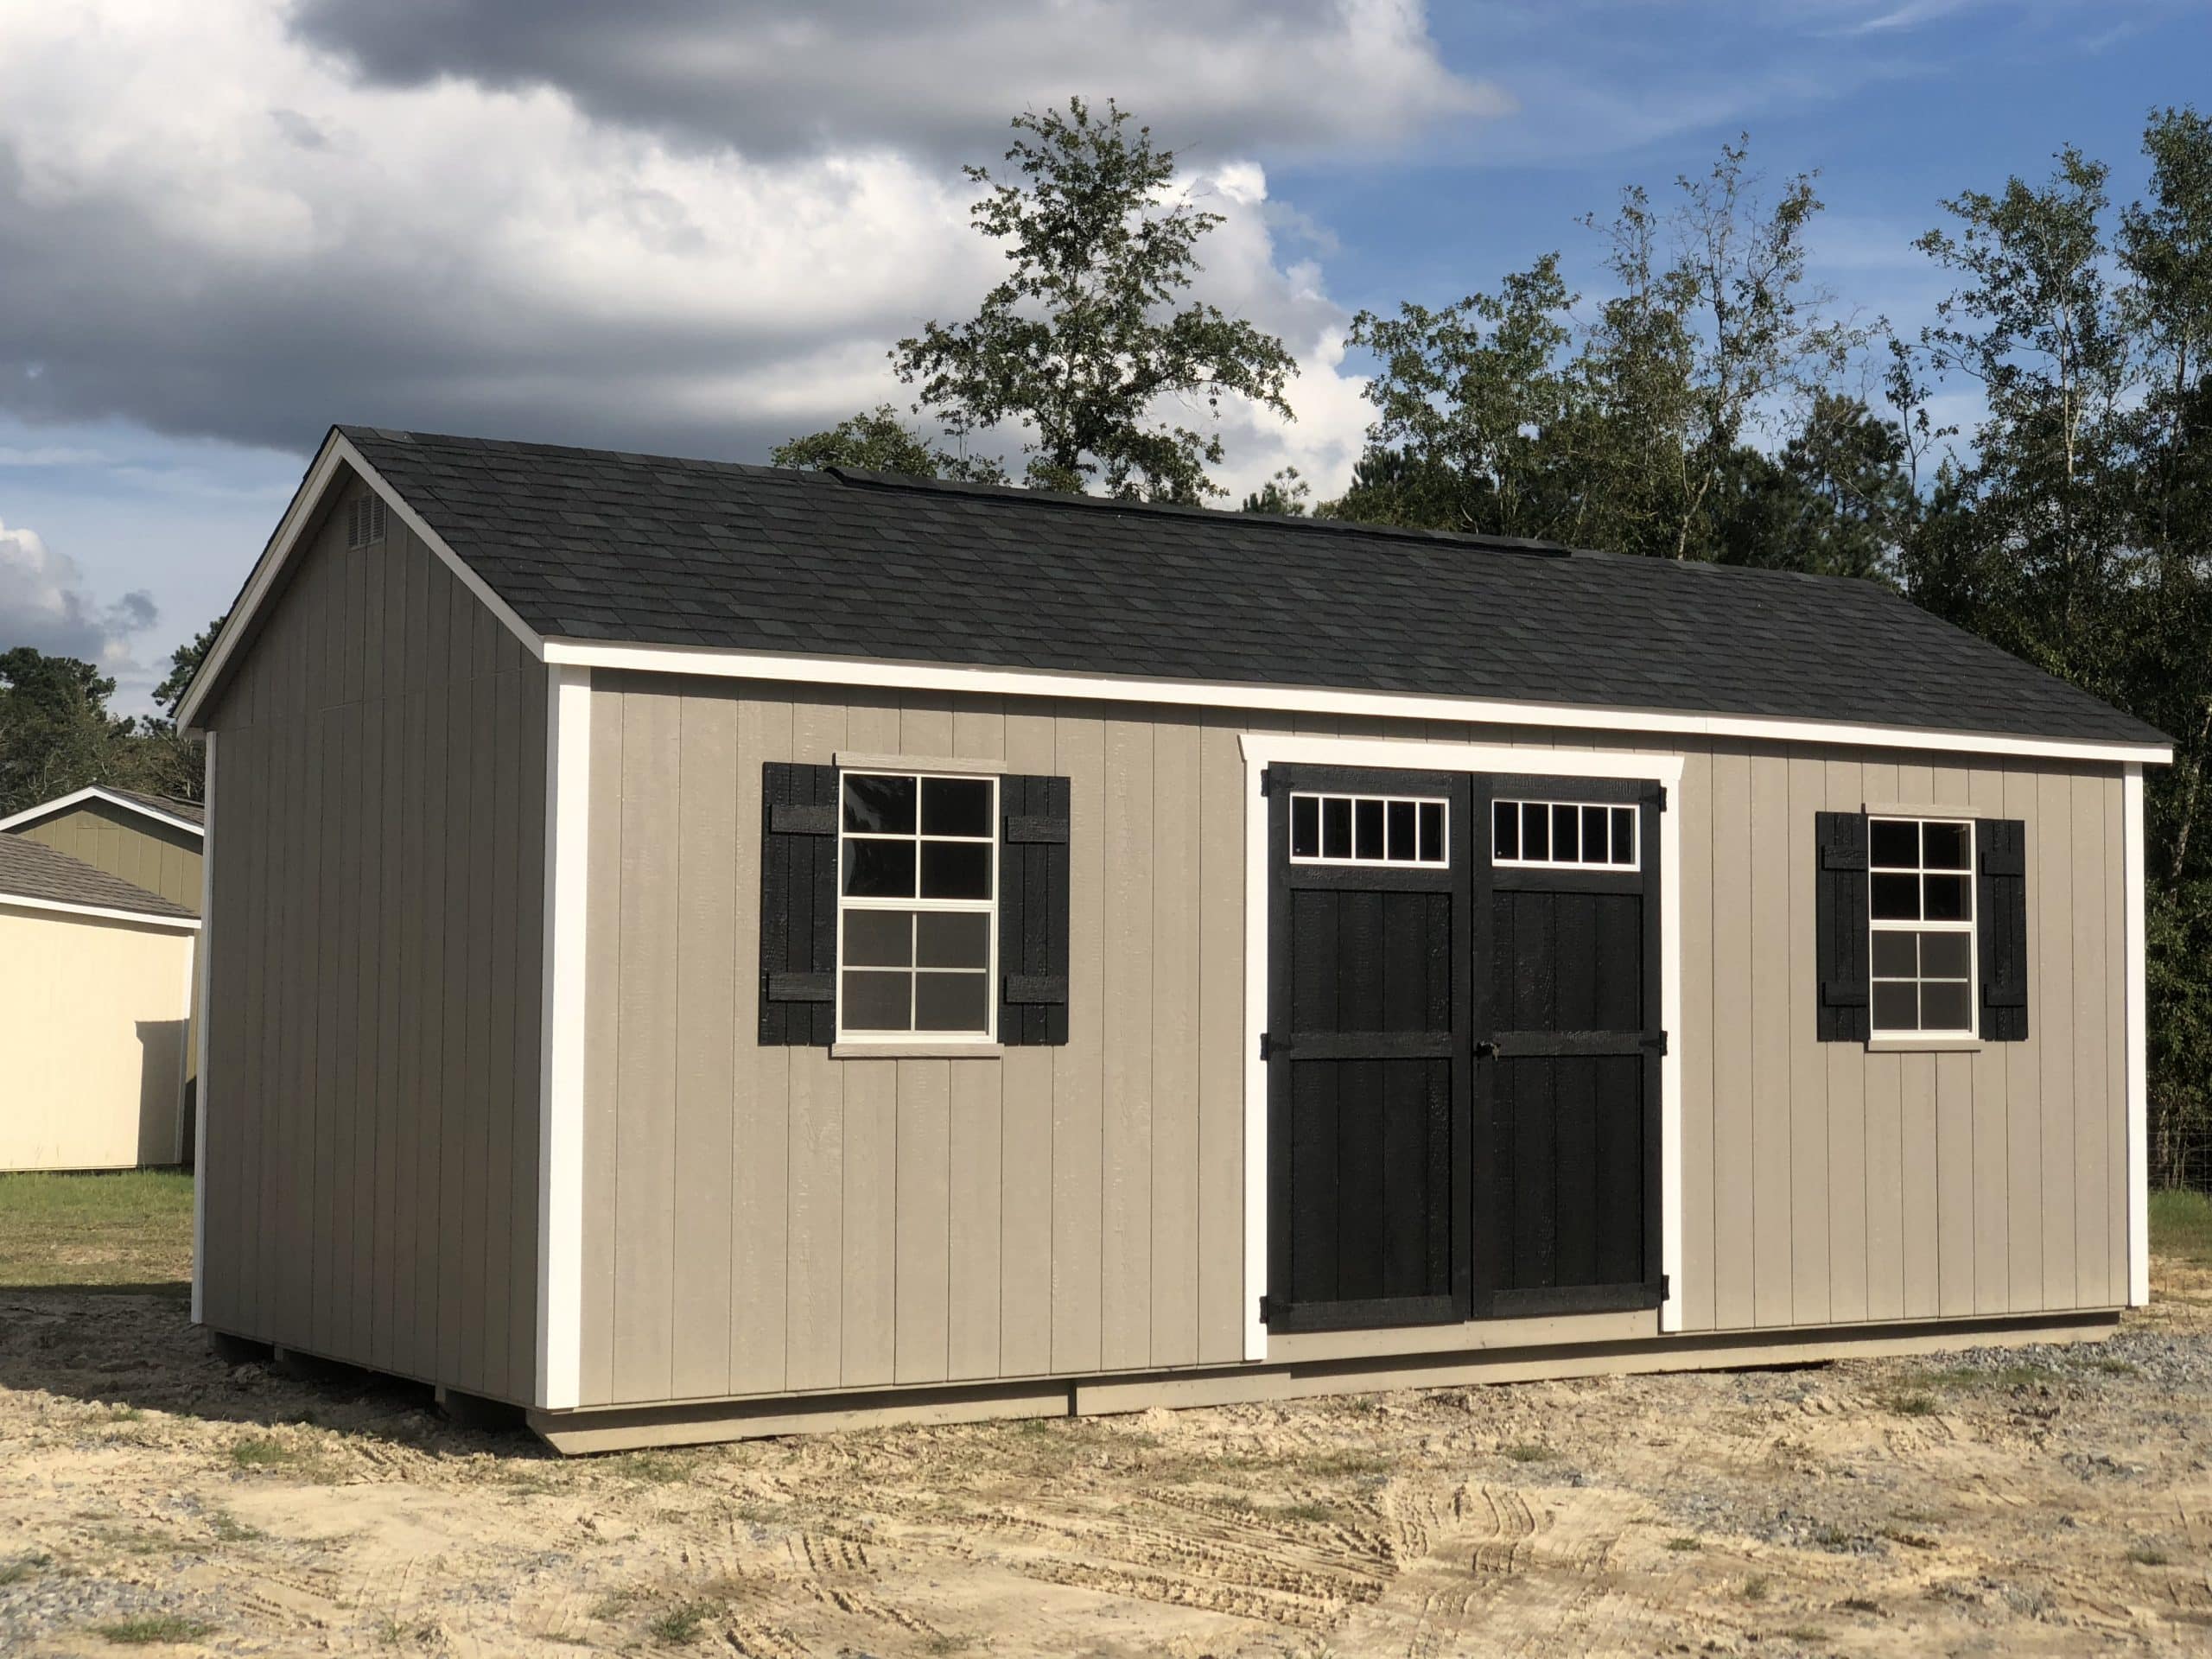 storage shed with engineered wood exterior walls